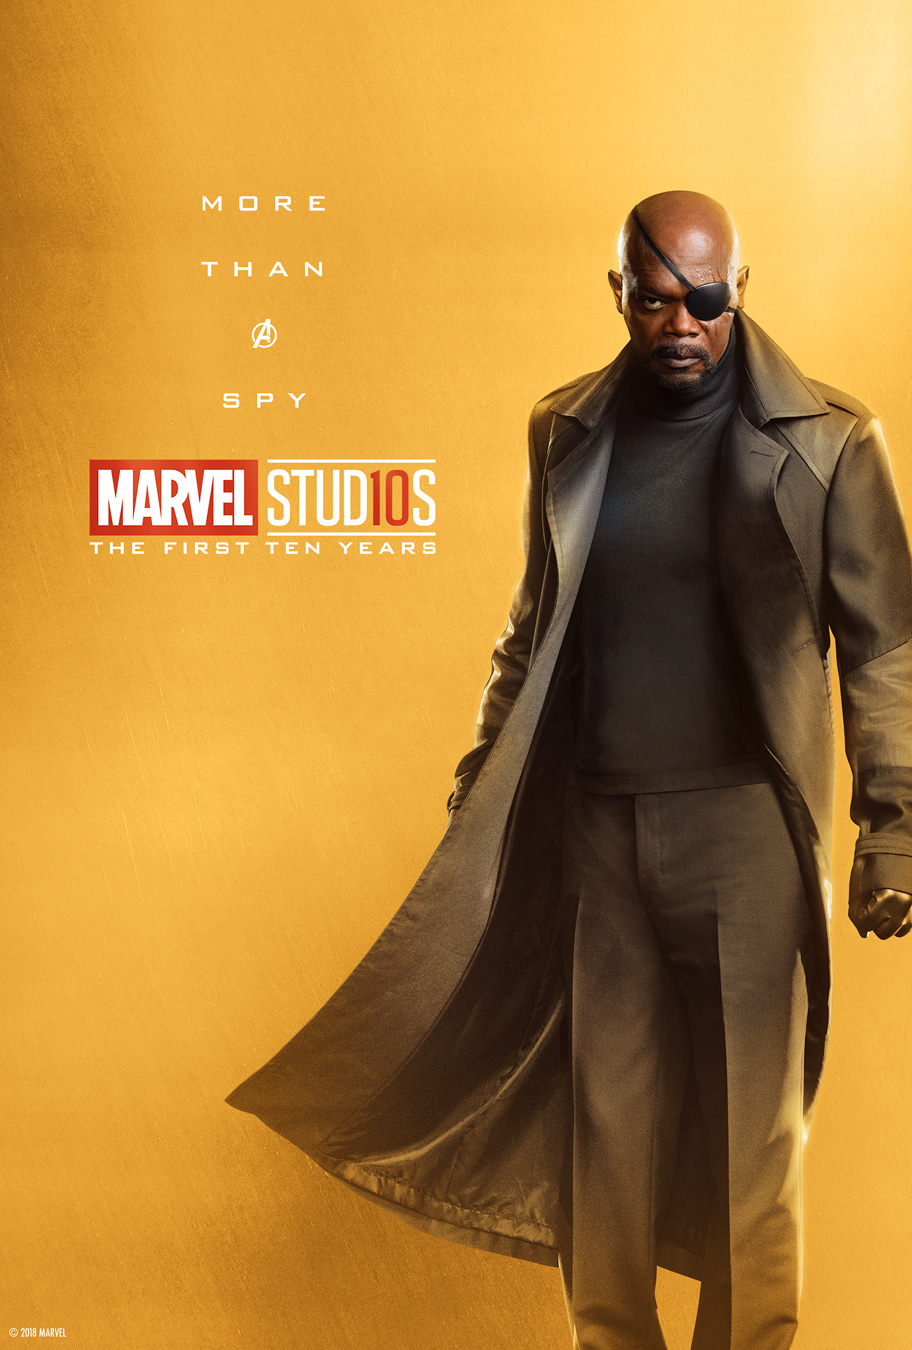 Marvel Studios The First Ten Years on Behance